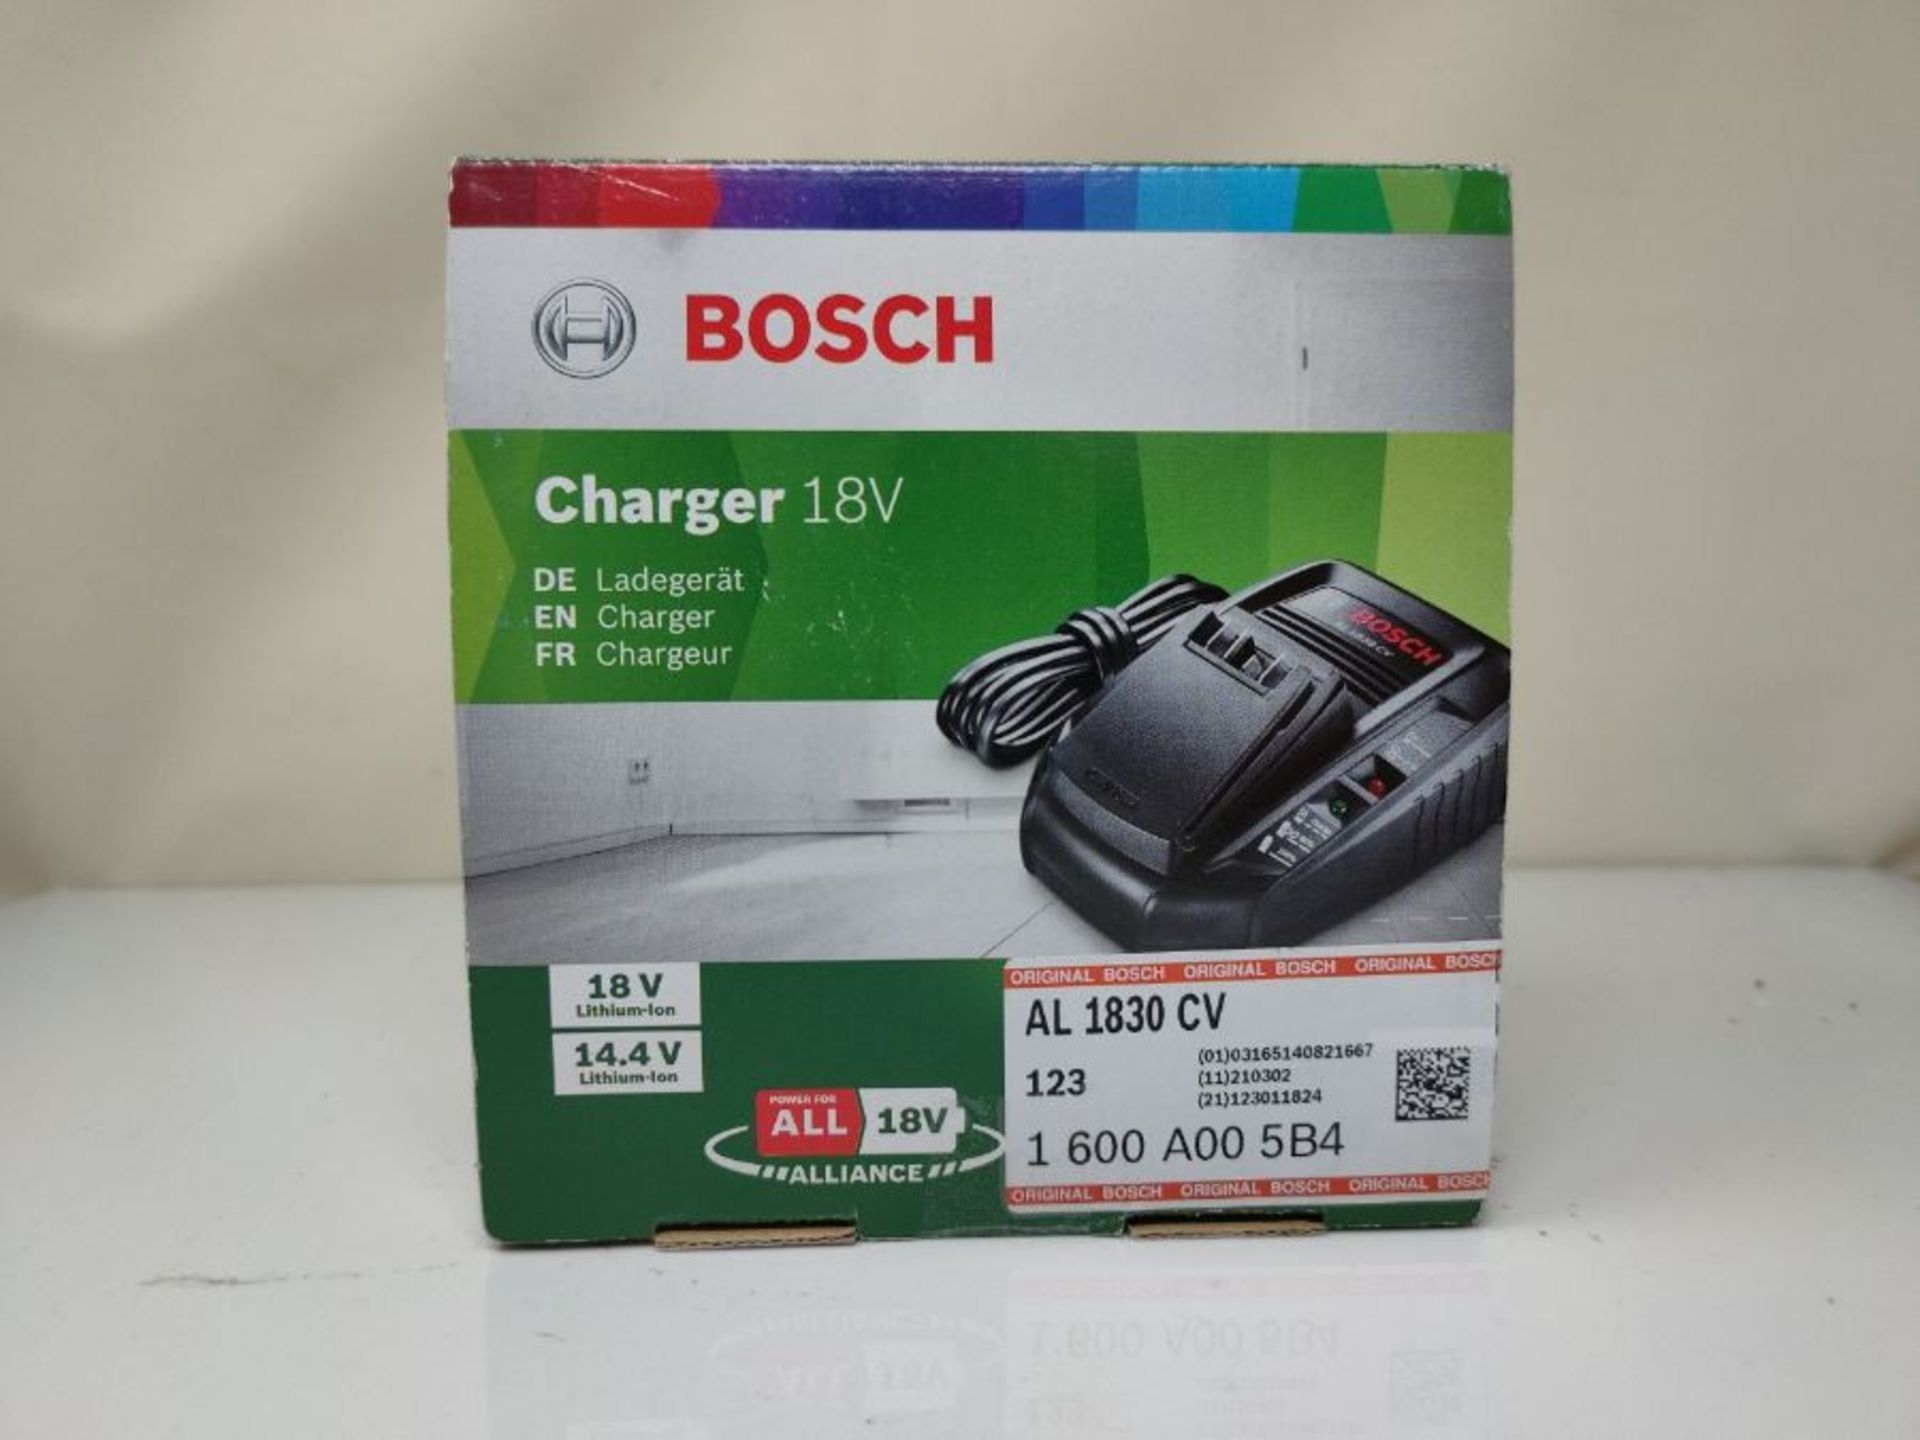 Bosch Home and Garden 1600A005B4 Battery Charger - Image 3 of 3